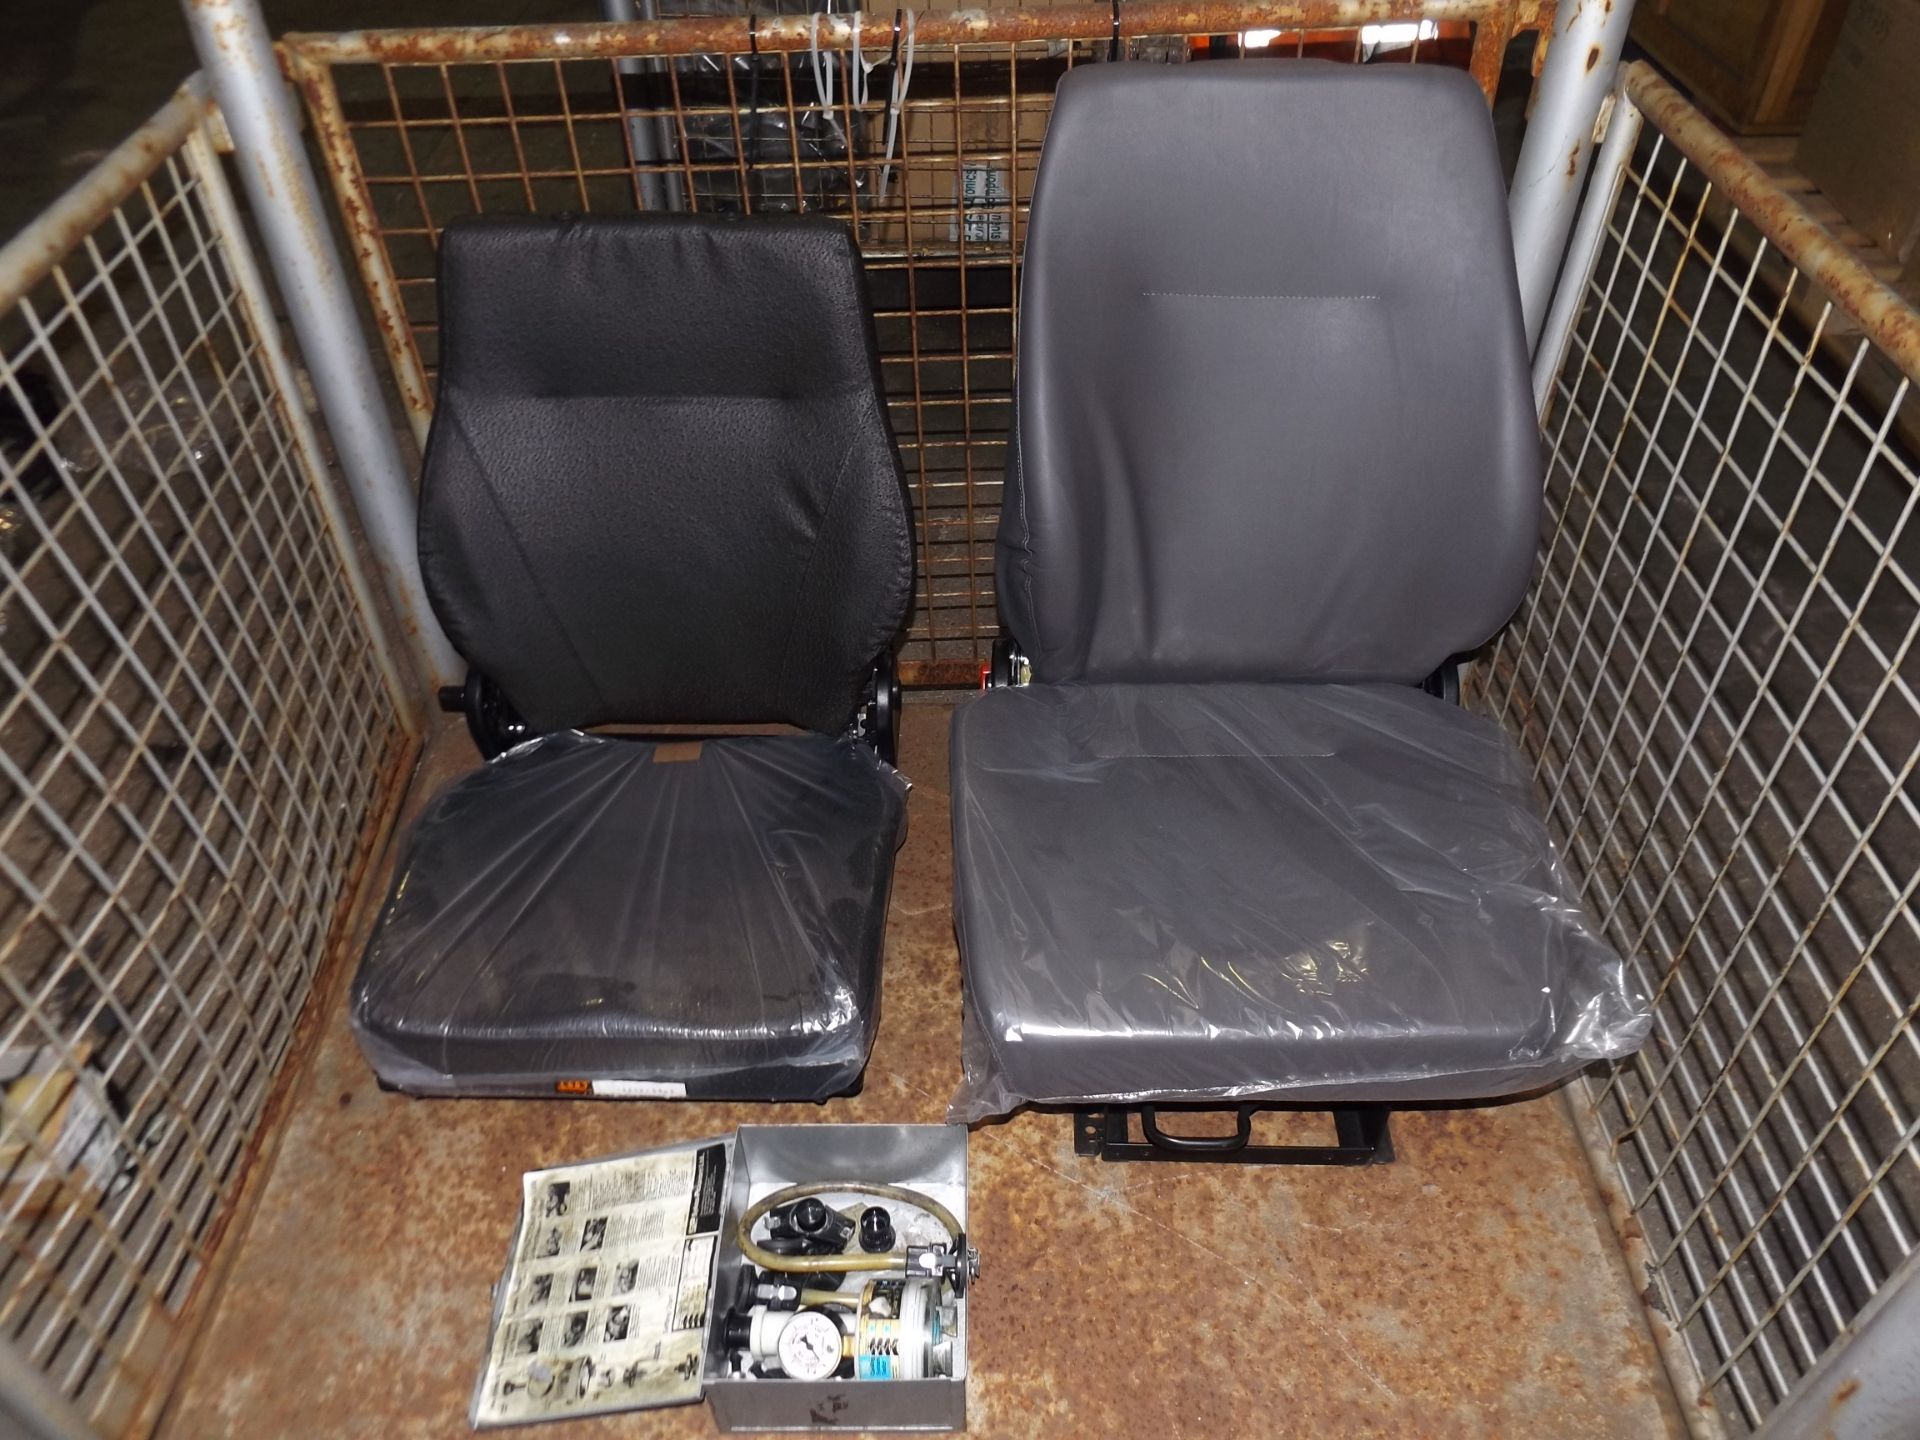 Mixed Operator Seats and Coolant Test Set